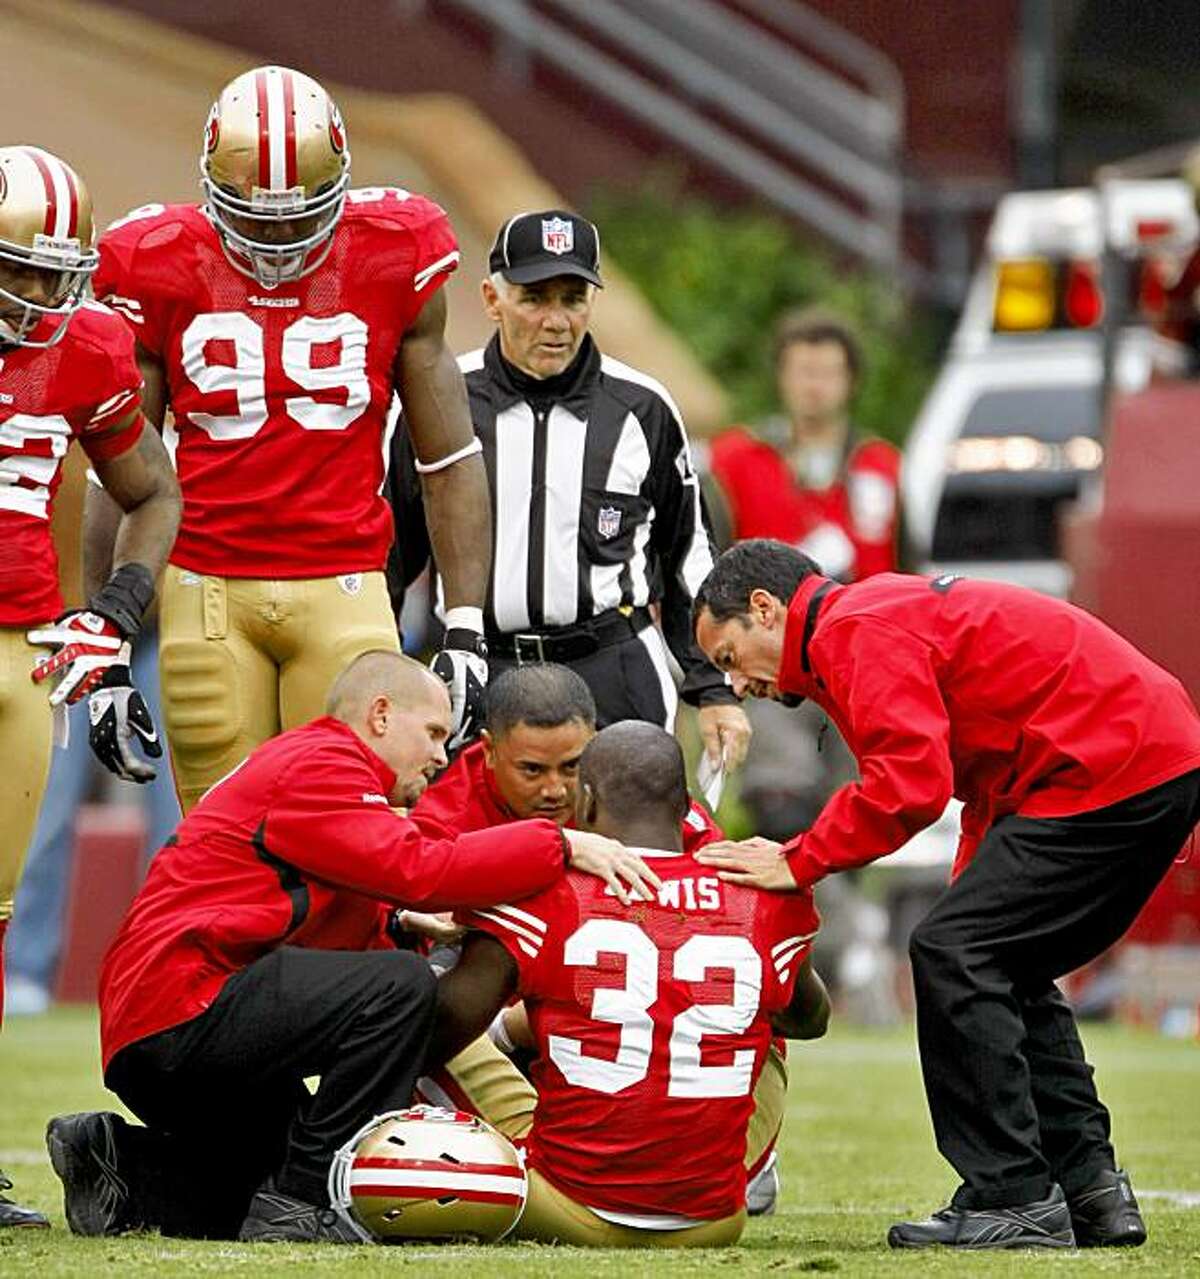 Michael Lewis is injured in the first half of the 49ers' game against the Atlanta Falcons on Sunday at Candlestick in San Francisco.